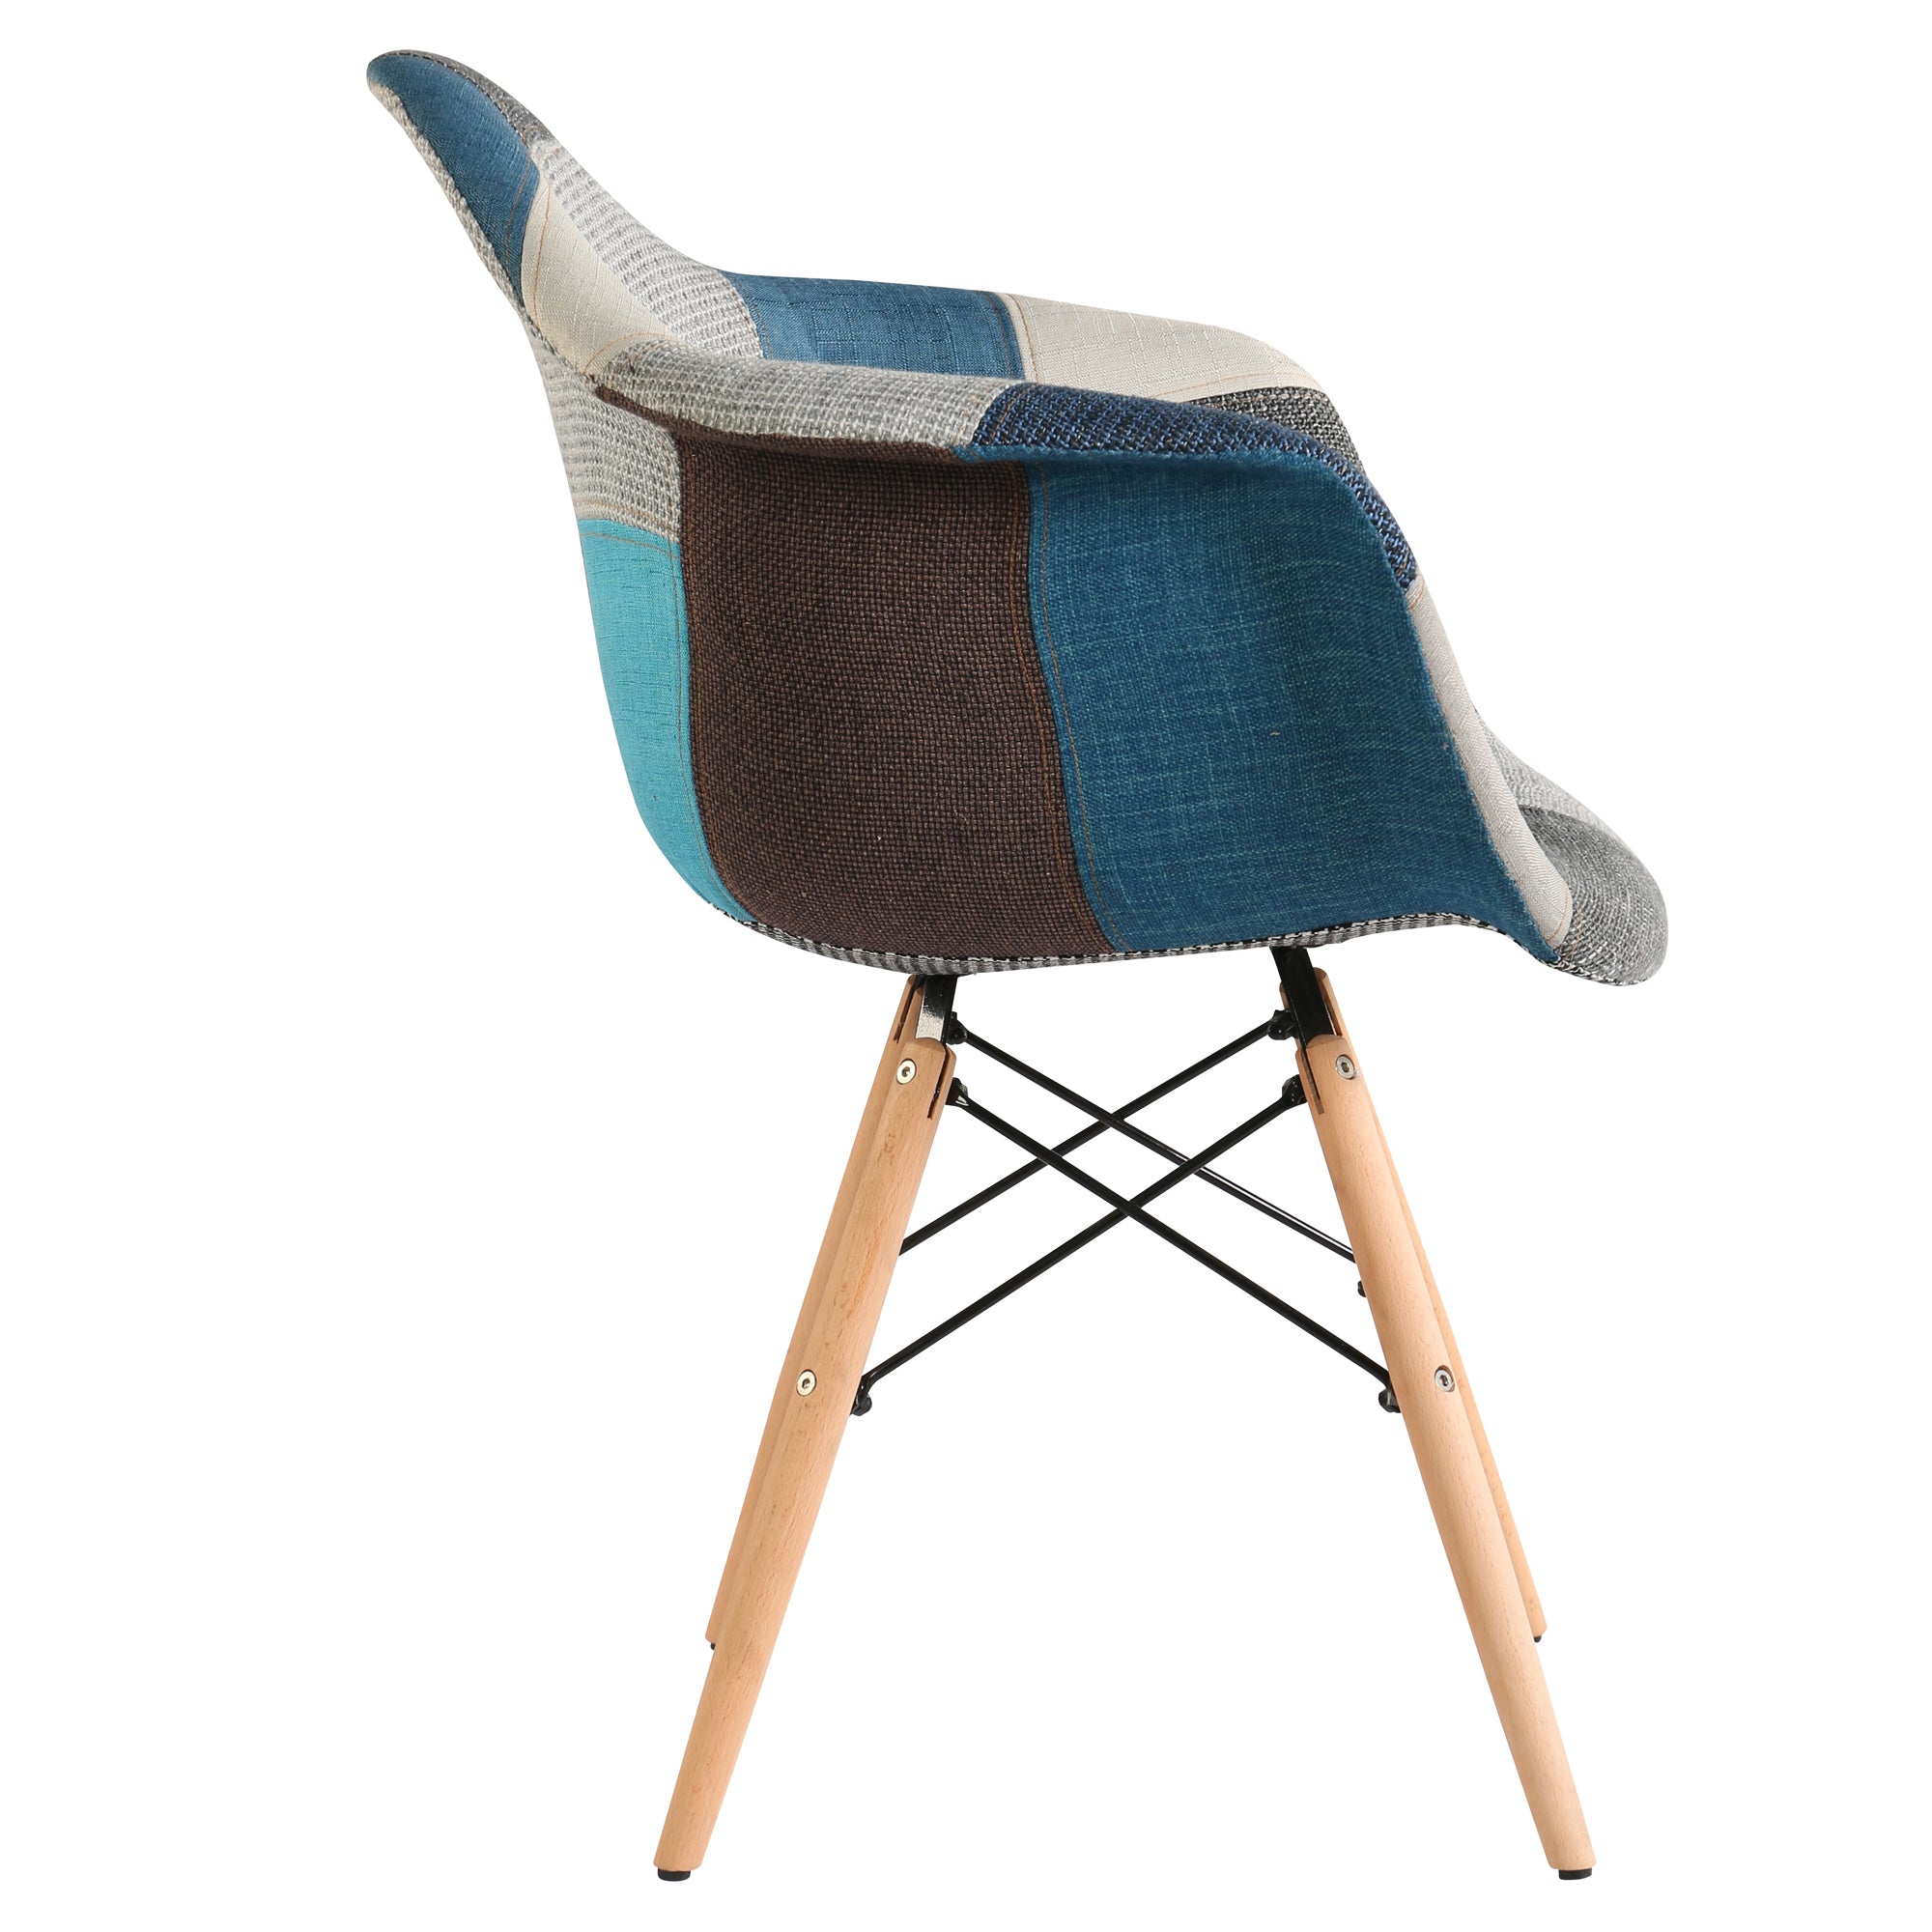 Armrest Patchwork Lounge Chair - Blue Chair urbancart.in